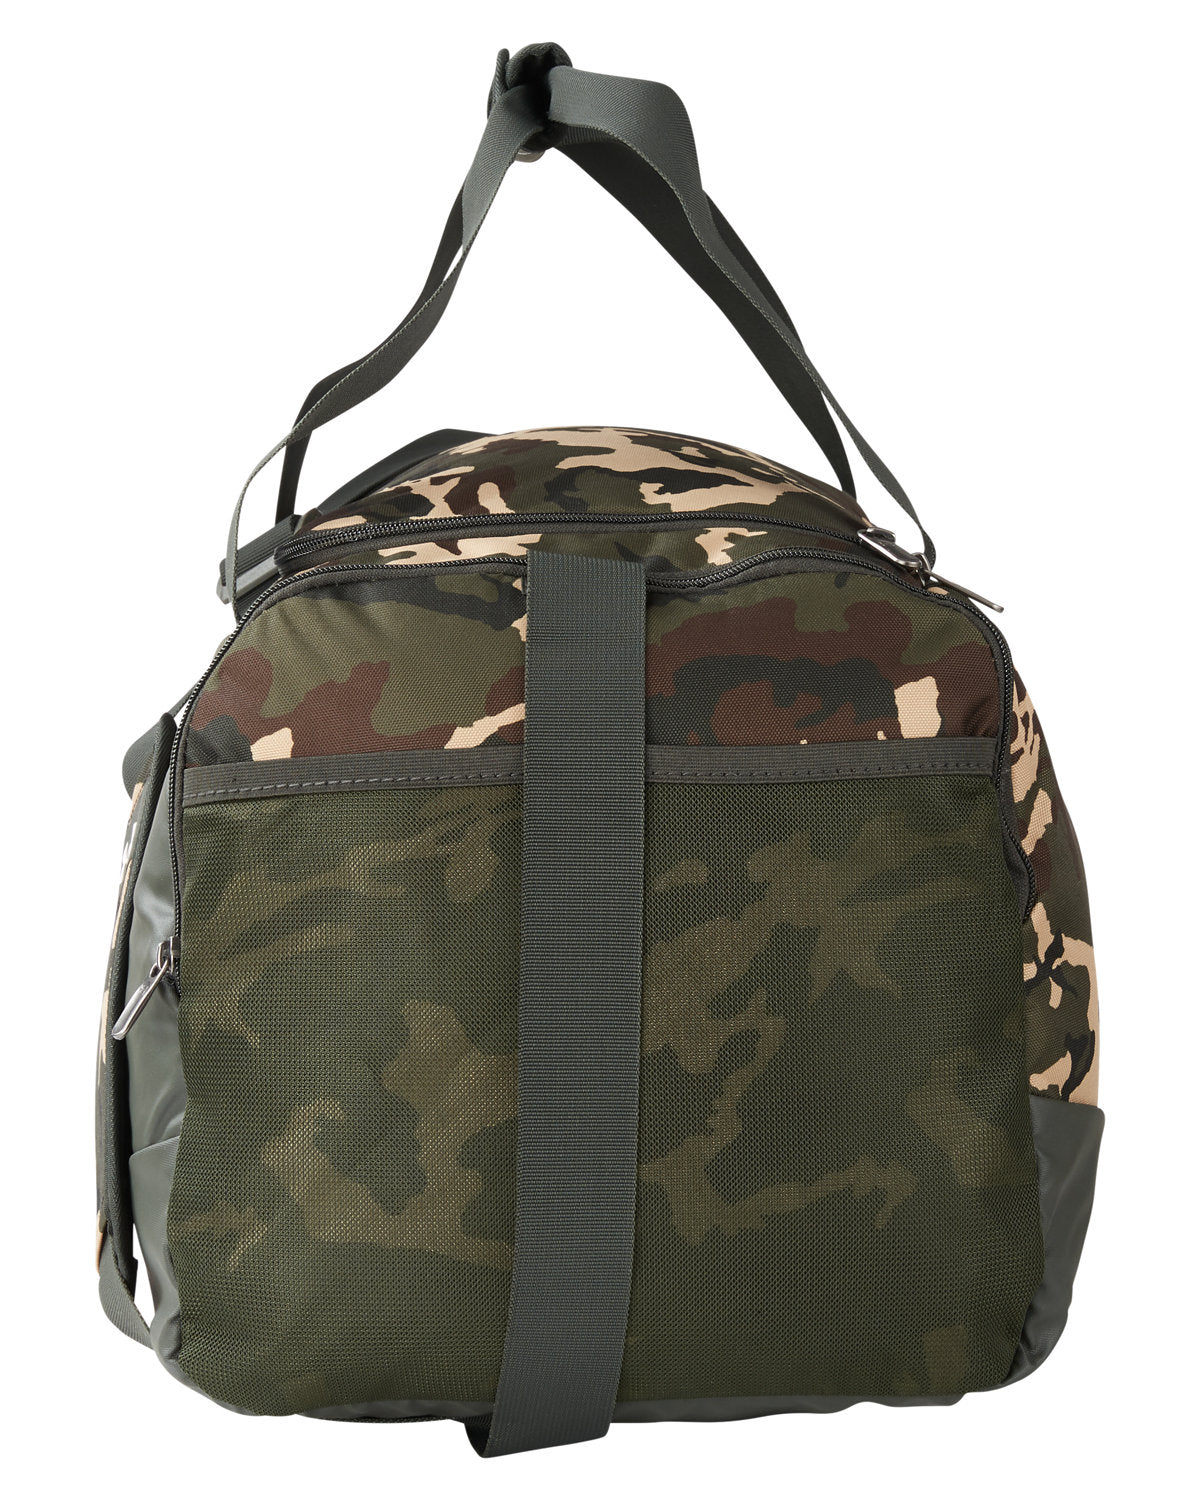 Under Armour Undeniable 5.0 MD Branded Duffel Bags, Camo